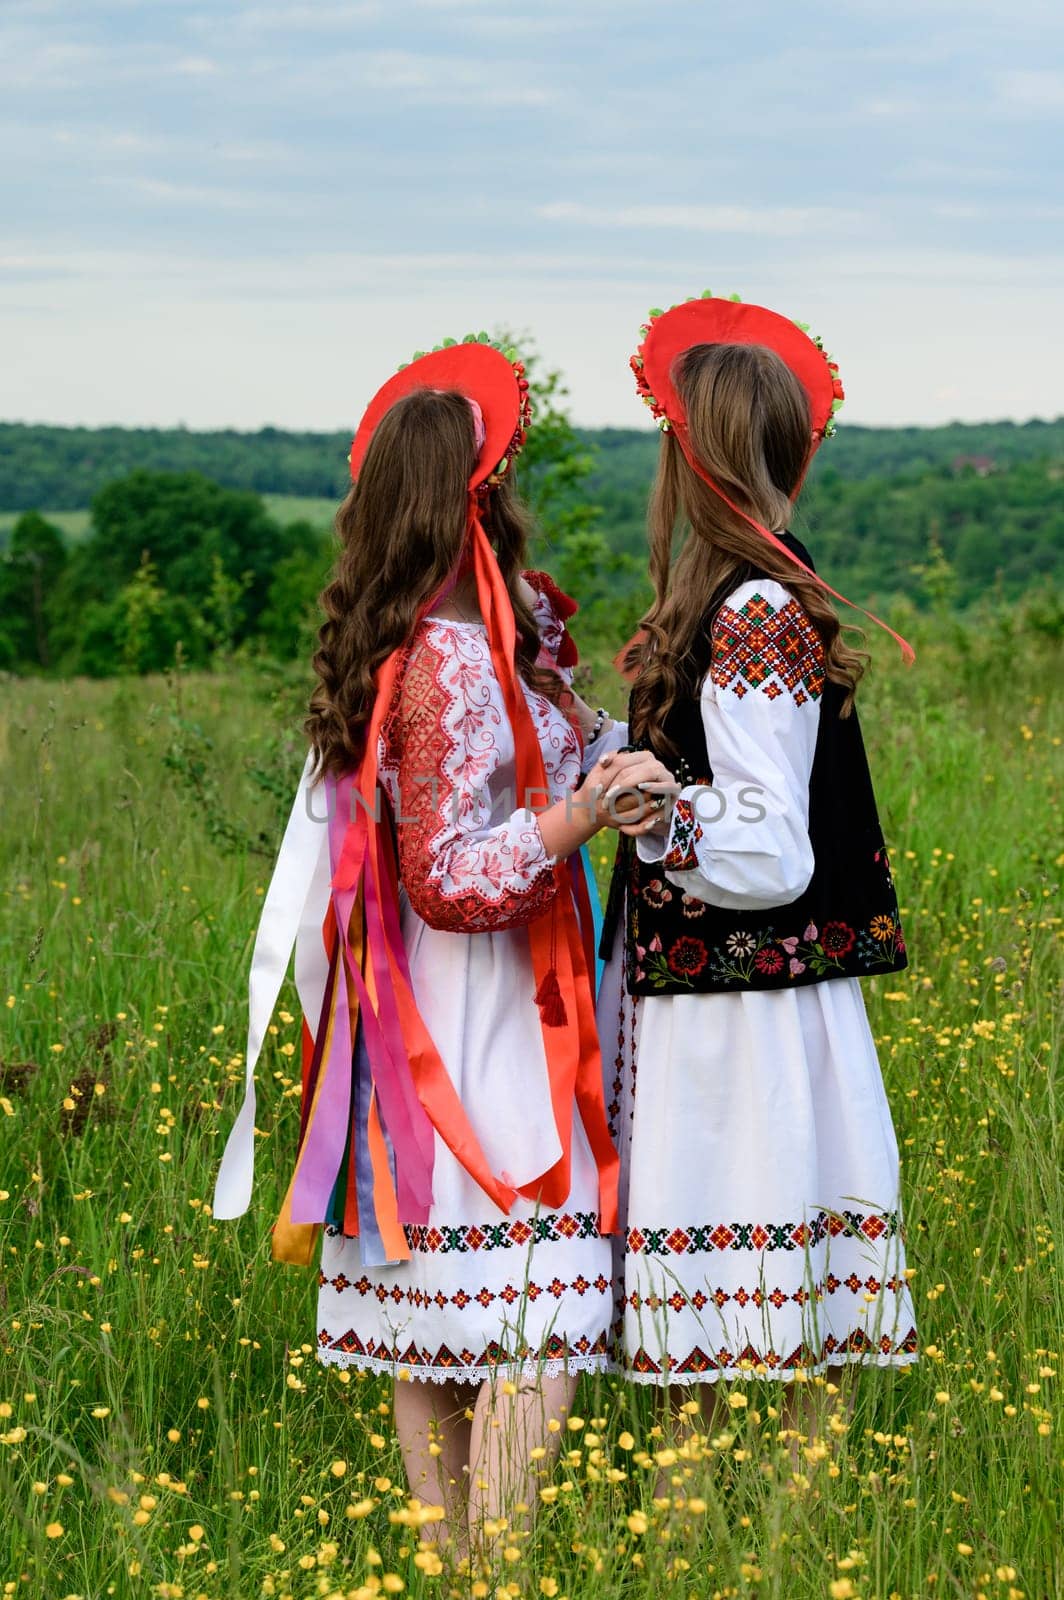 A group of girls are walking in a field, they are dressed in Ukrainian ethnic and national clothes. by Niko_Cingaryuk